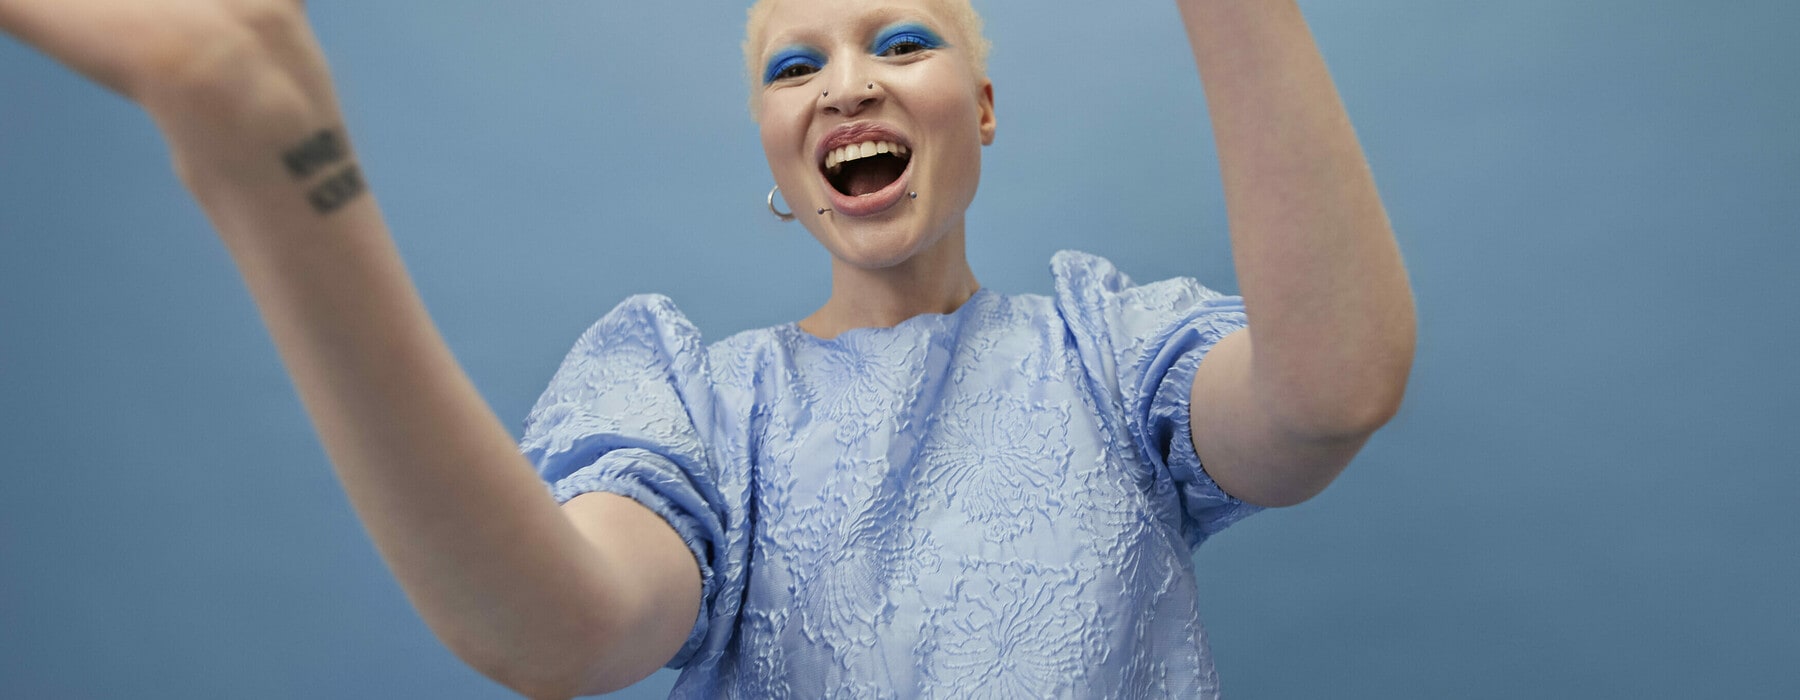 Portrait of happy albino young woman enjoying while dancing against blue background